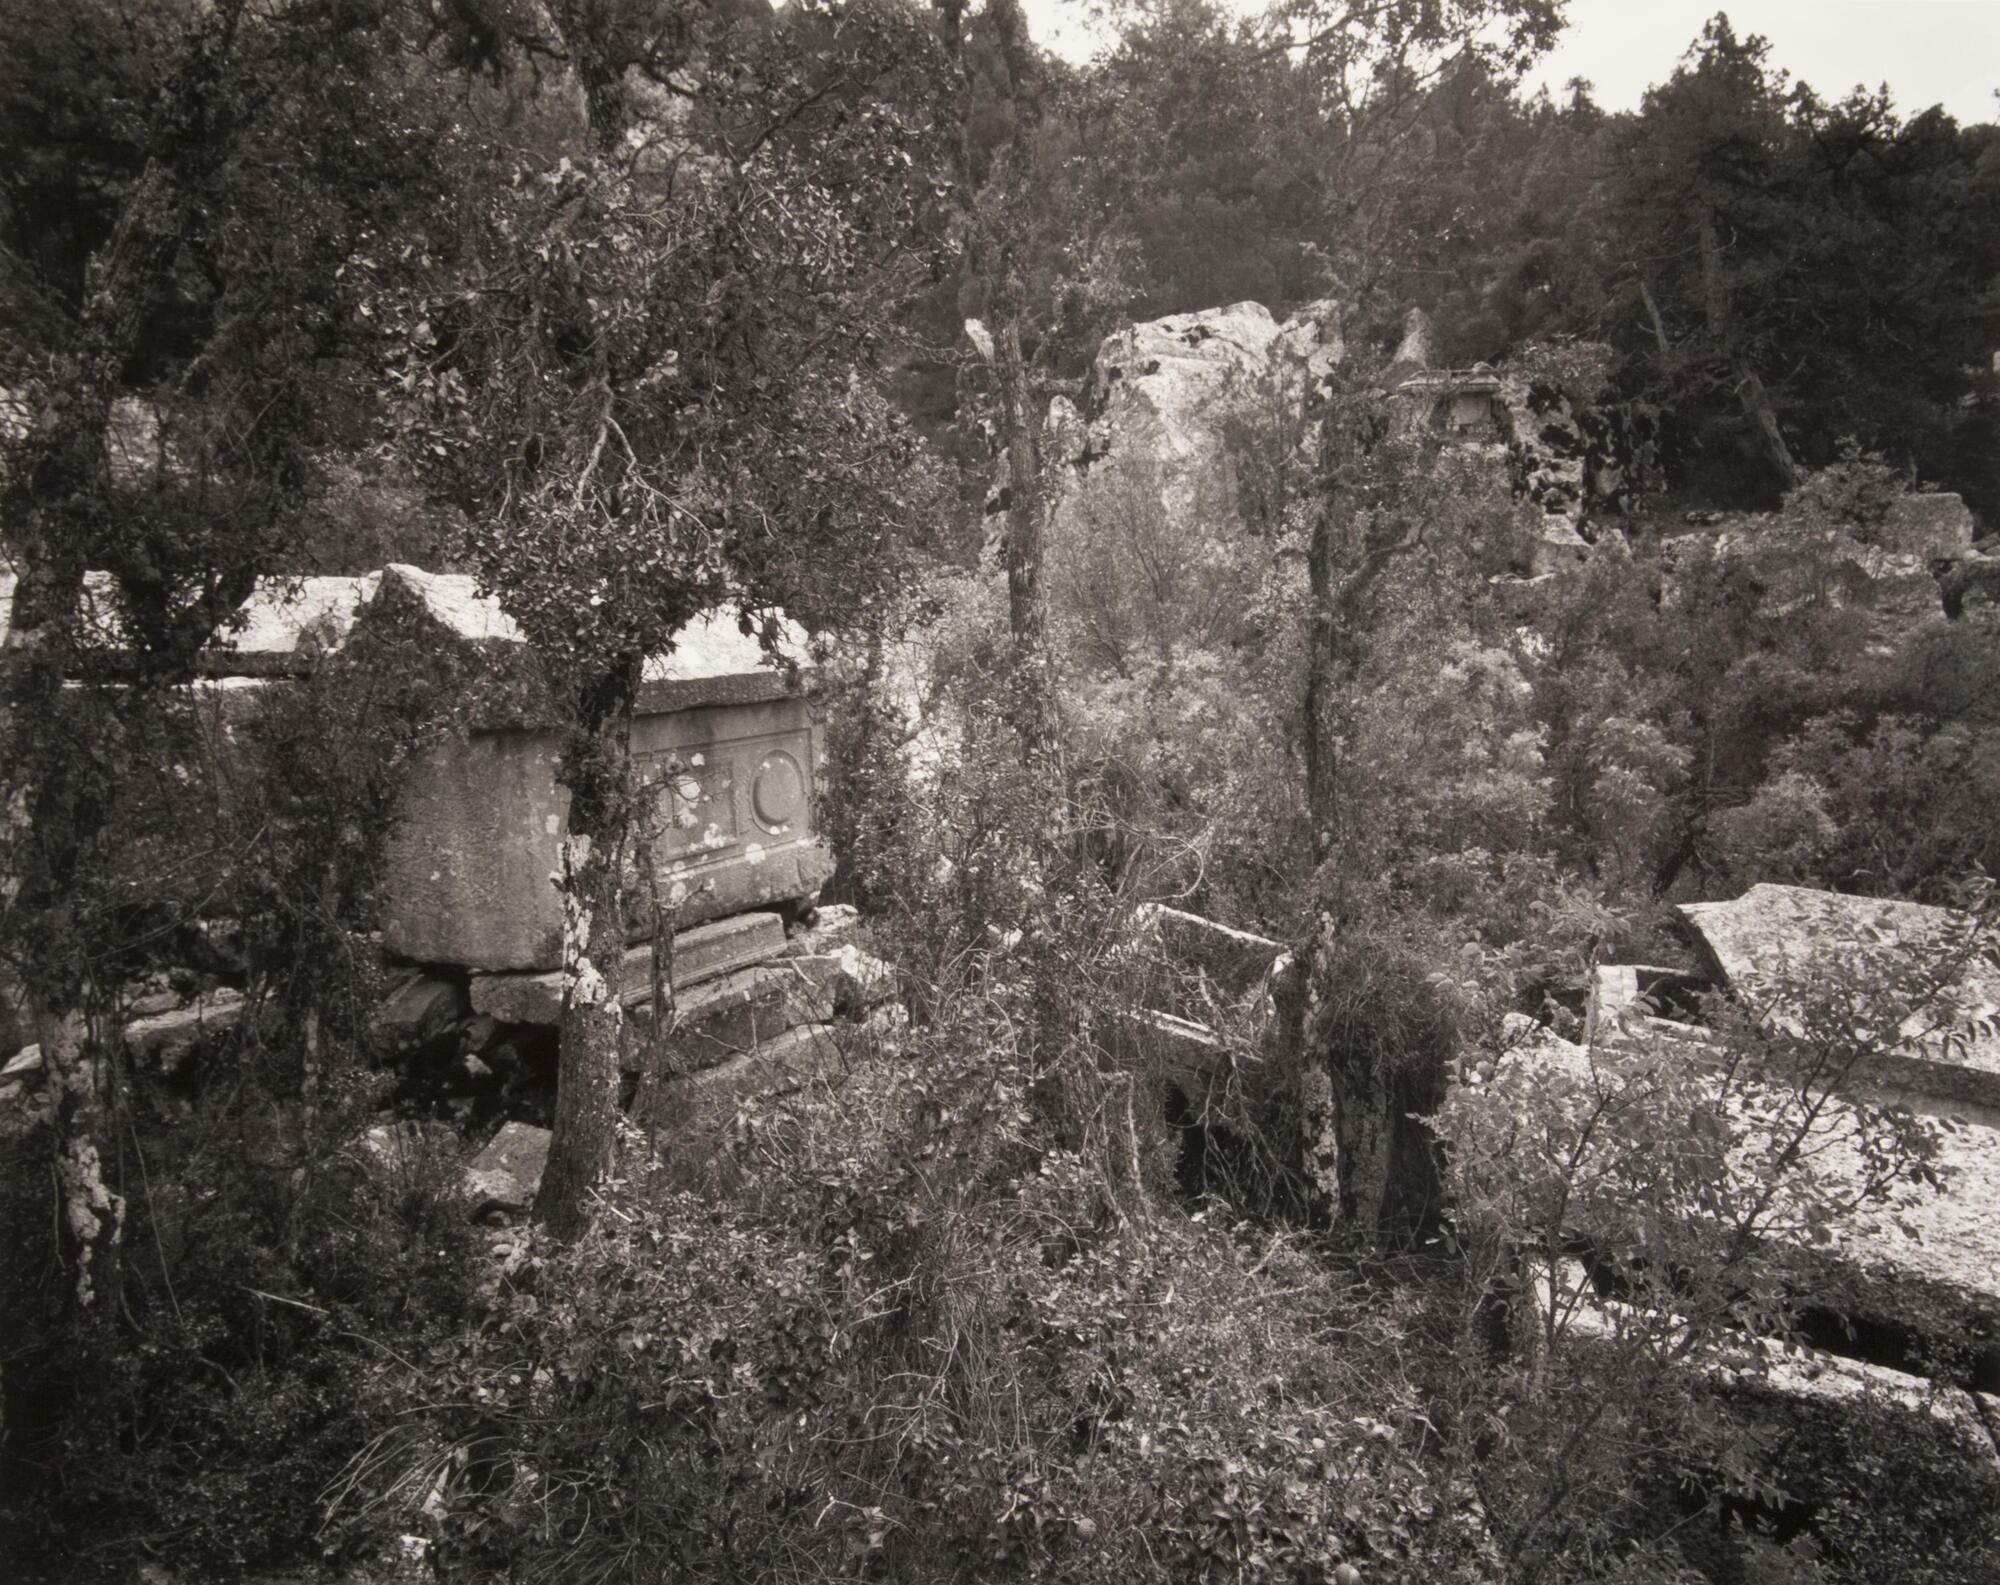 This photograph depicts sarcophagi in ruins on a mountainside.